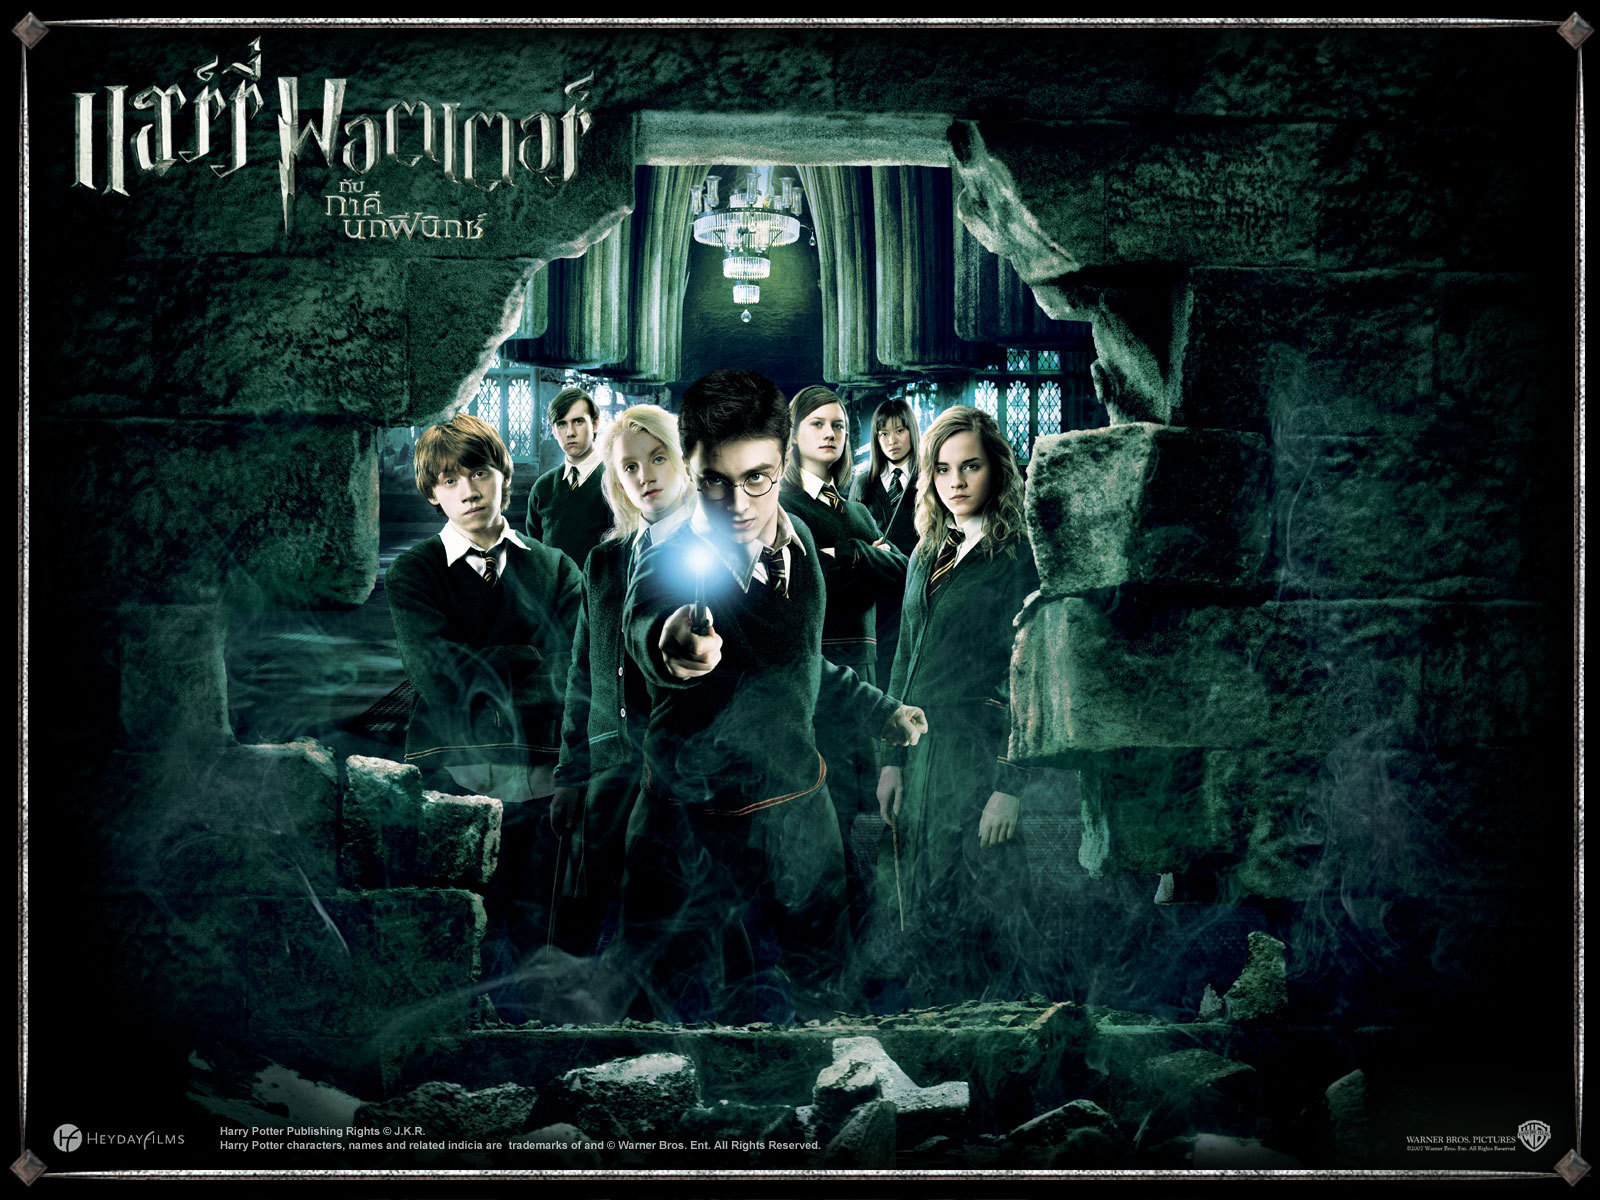 harry potter wallpaper download,poster,movie,album cover,photography,darkness